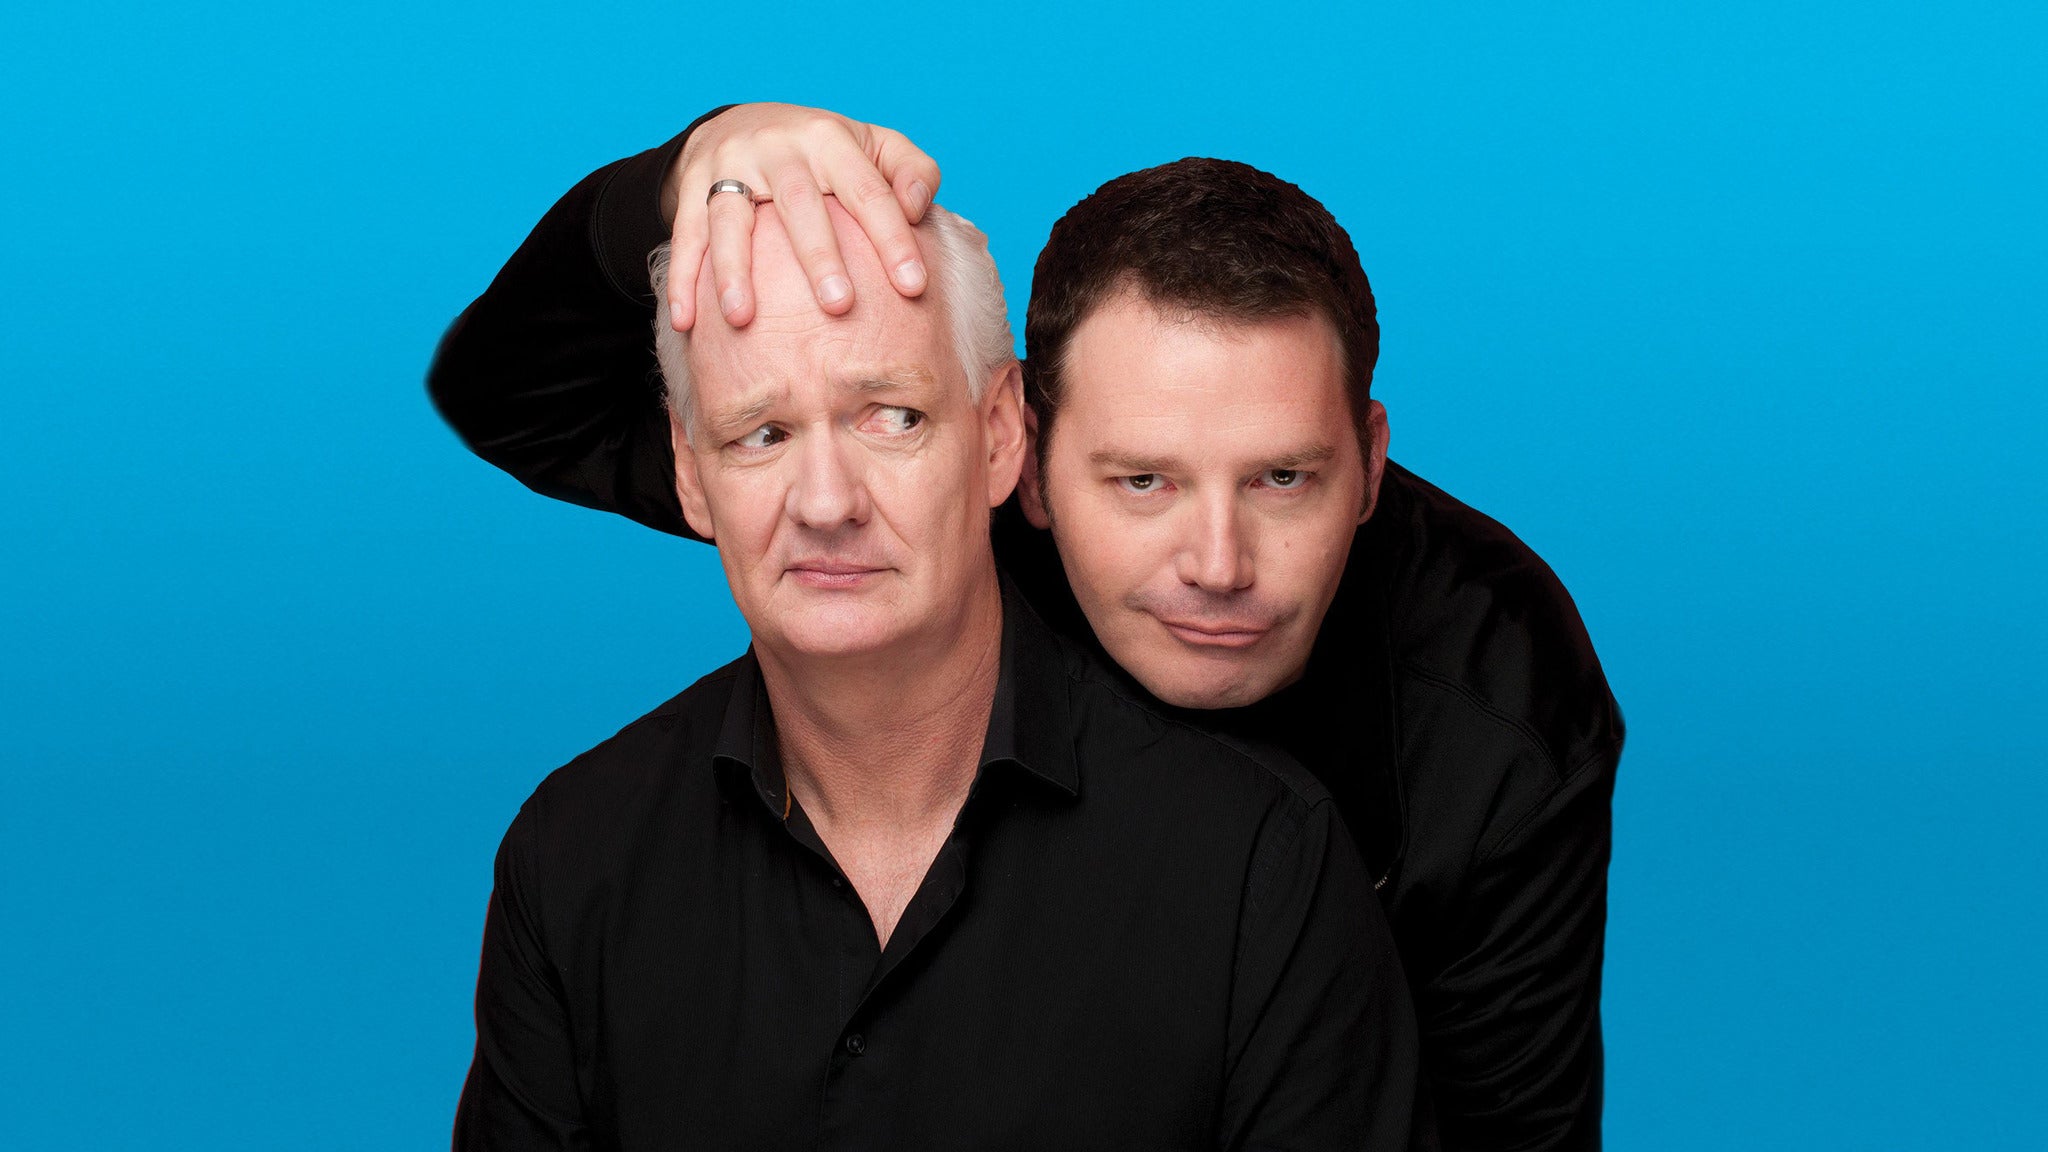 Colin Mochrie & Brad Sherwood:  Asking For Trouble